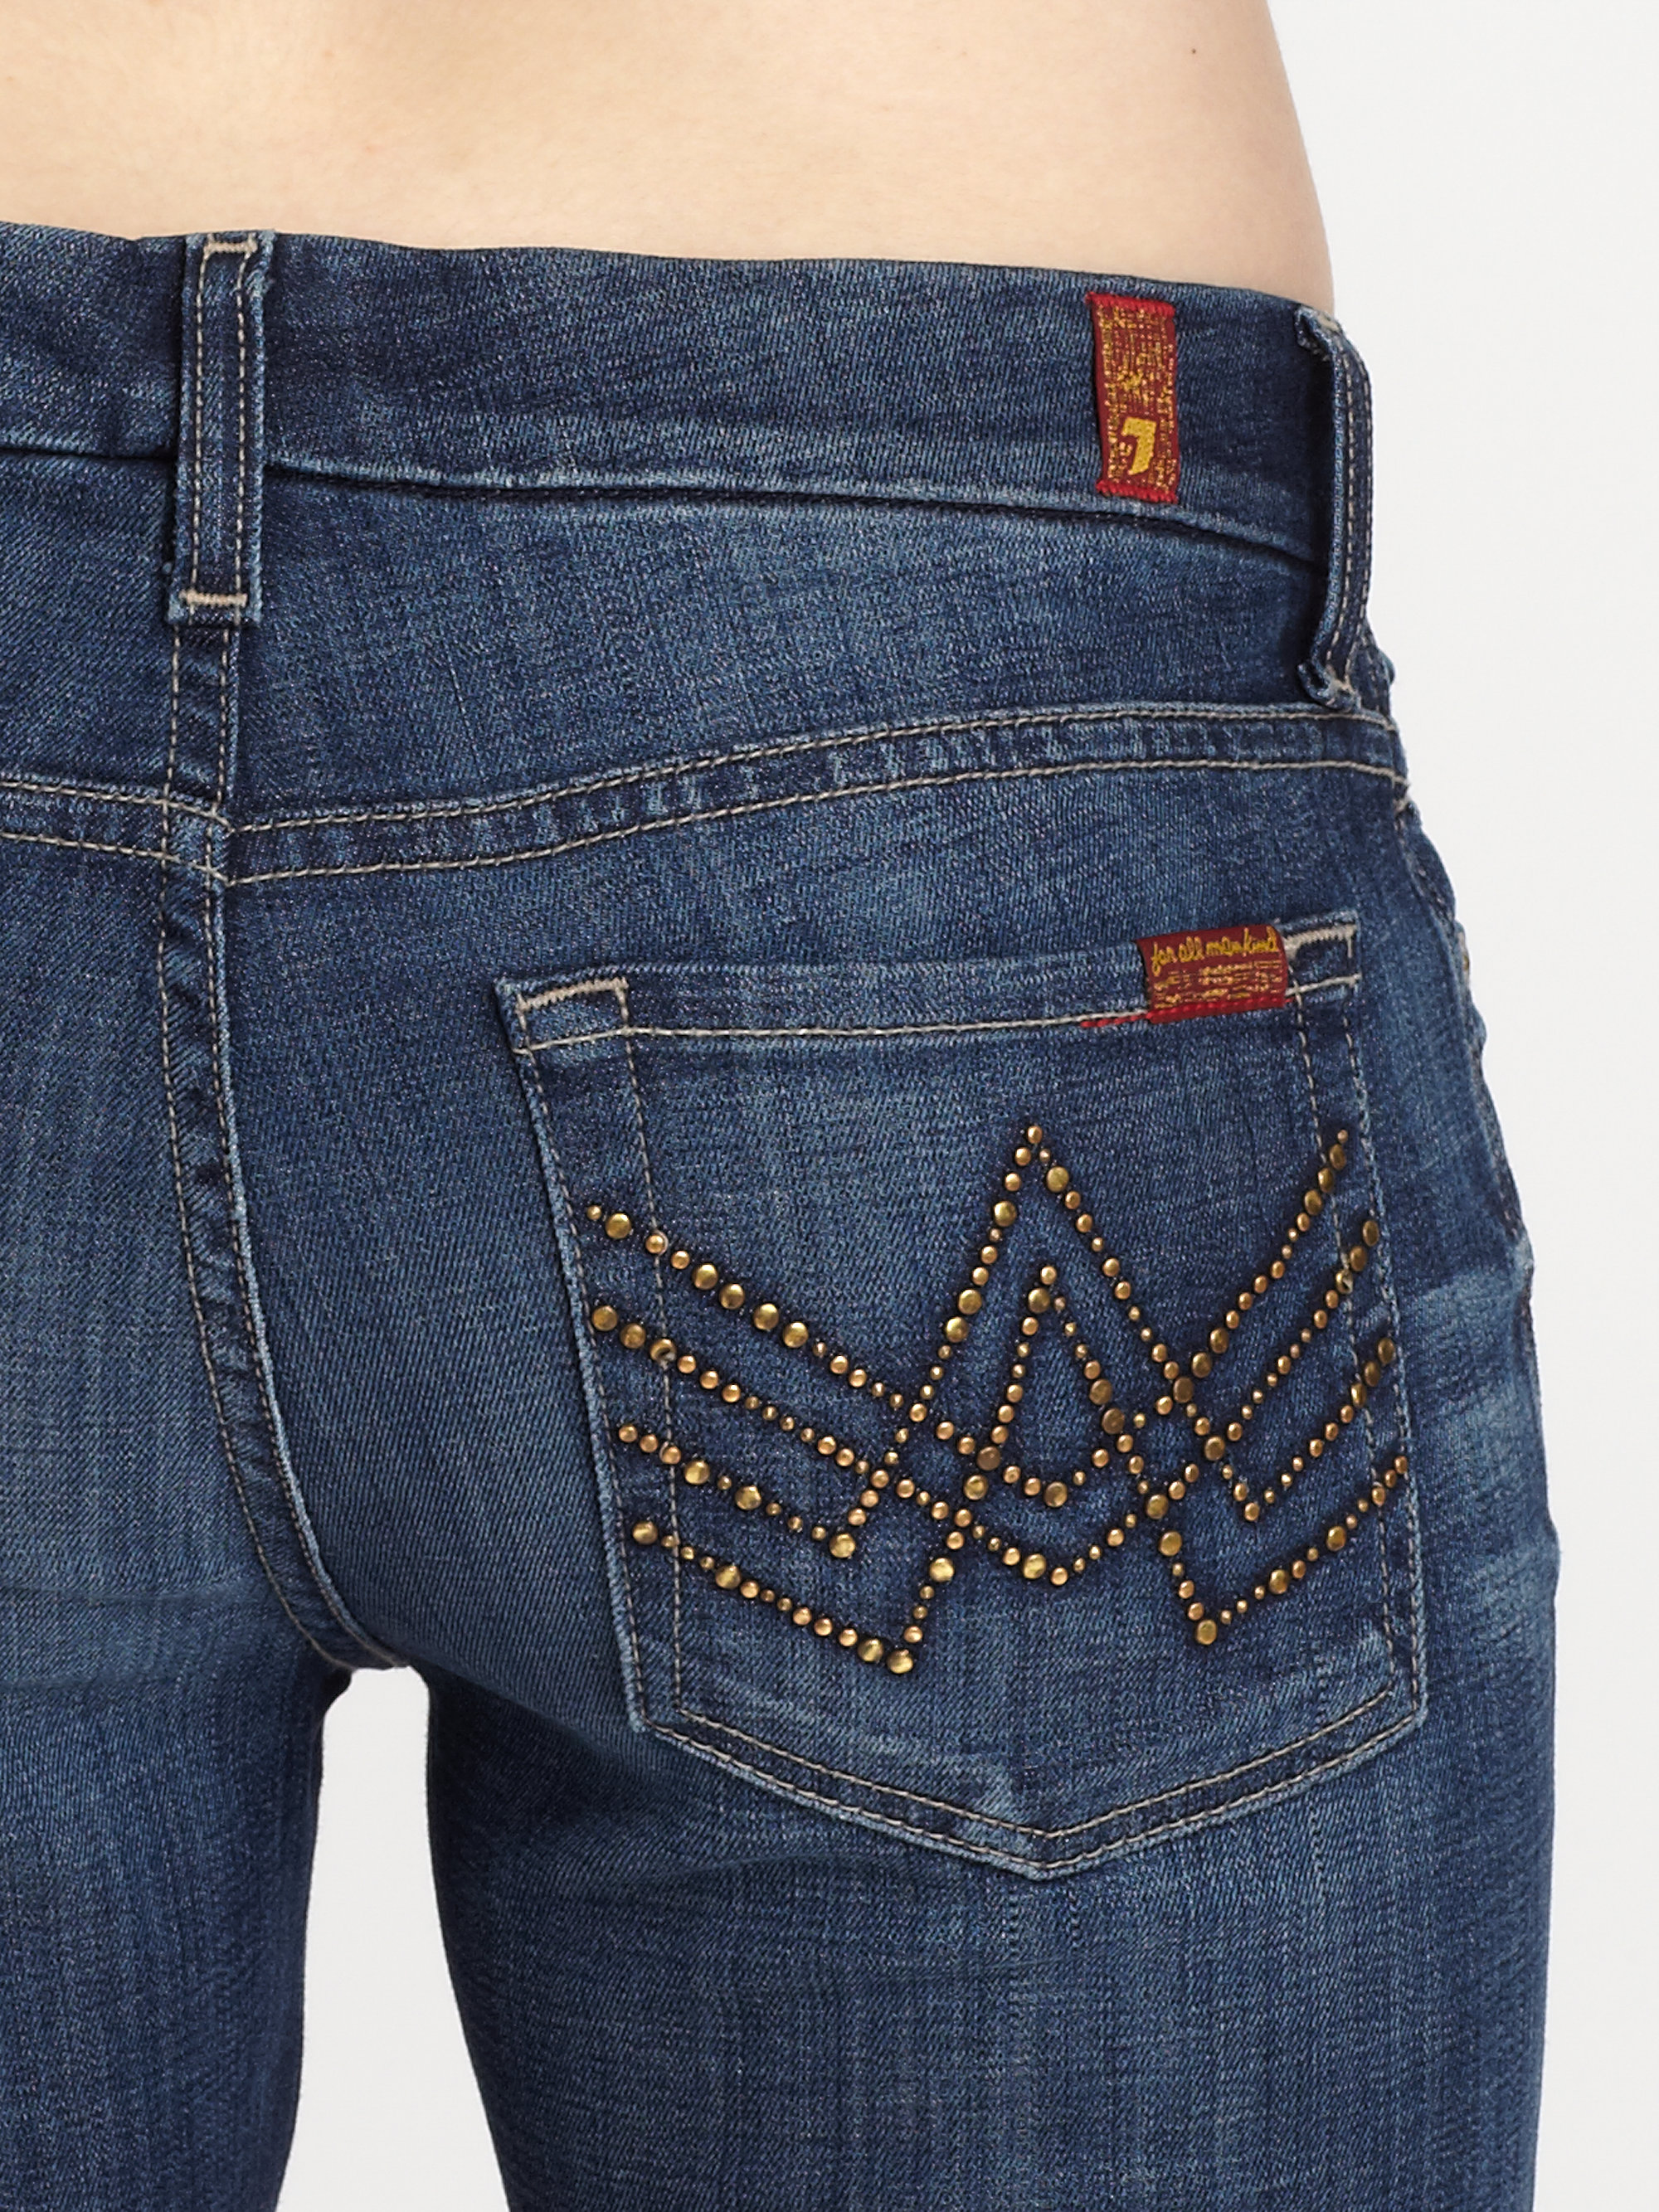 7 for All Mankind Is No Longer the Noughties Denim Brand You Knew 7